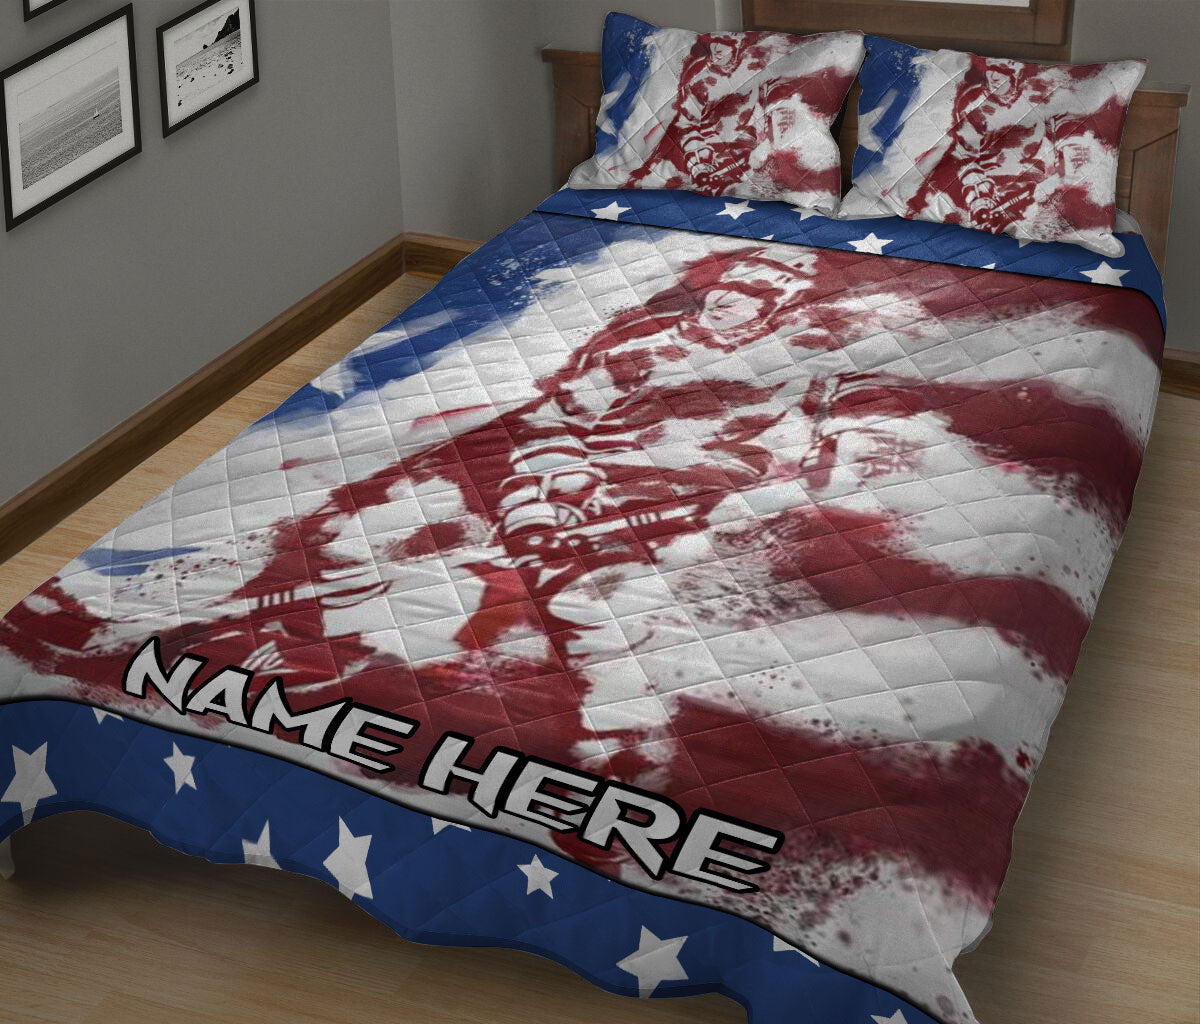 Ohaprints-Quilt-Bed-Set-Pillowcase-Hockey-Player-American-Us-Flag-Sports-Lover-Gift-Custom-Personalized-Name-Blanket-Bedspread-Bedding-2705-King (90'' x 100'')